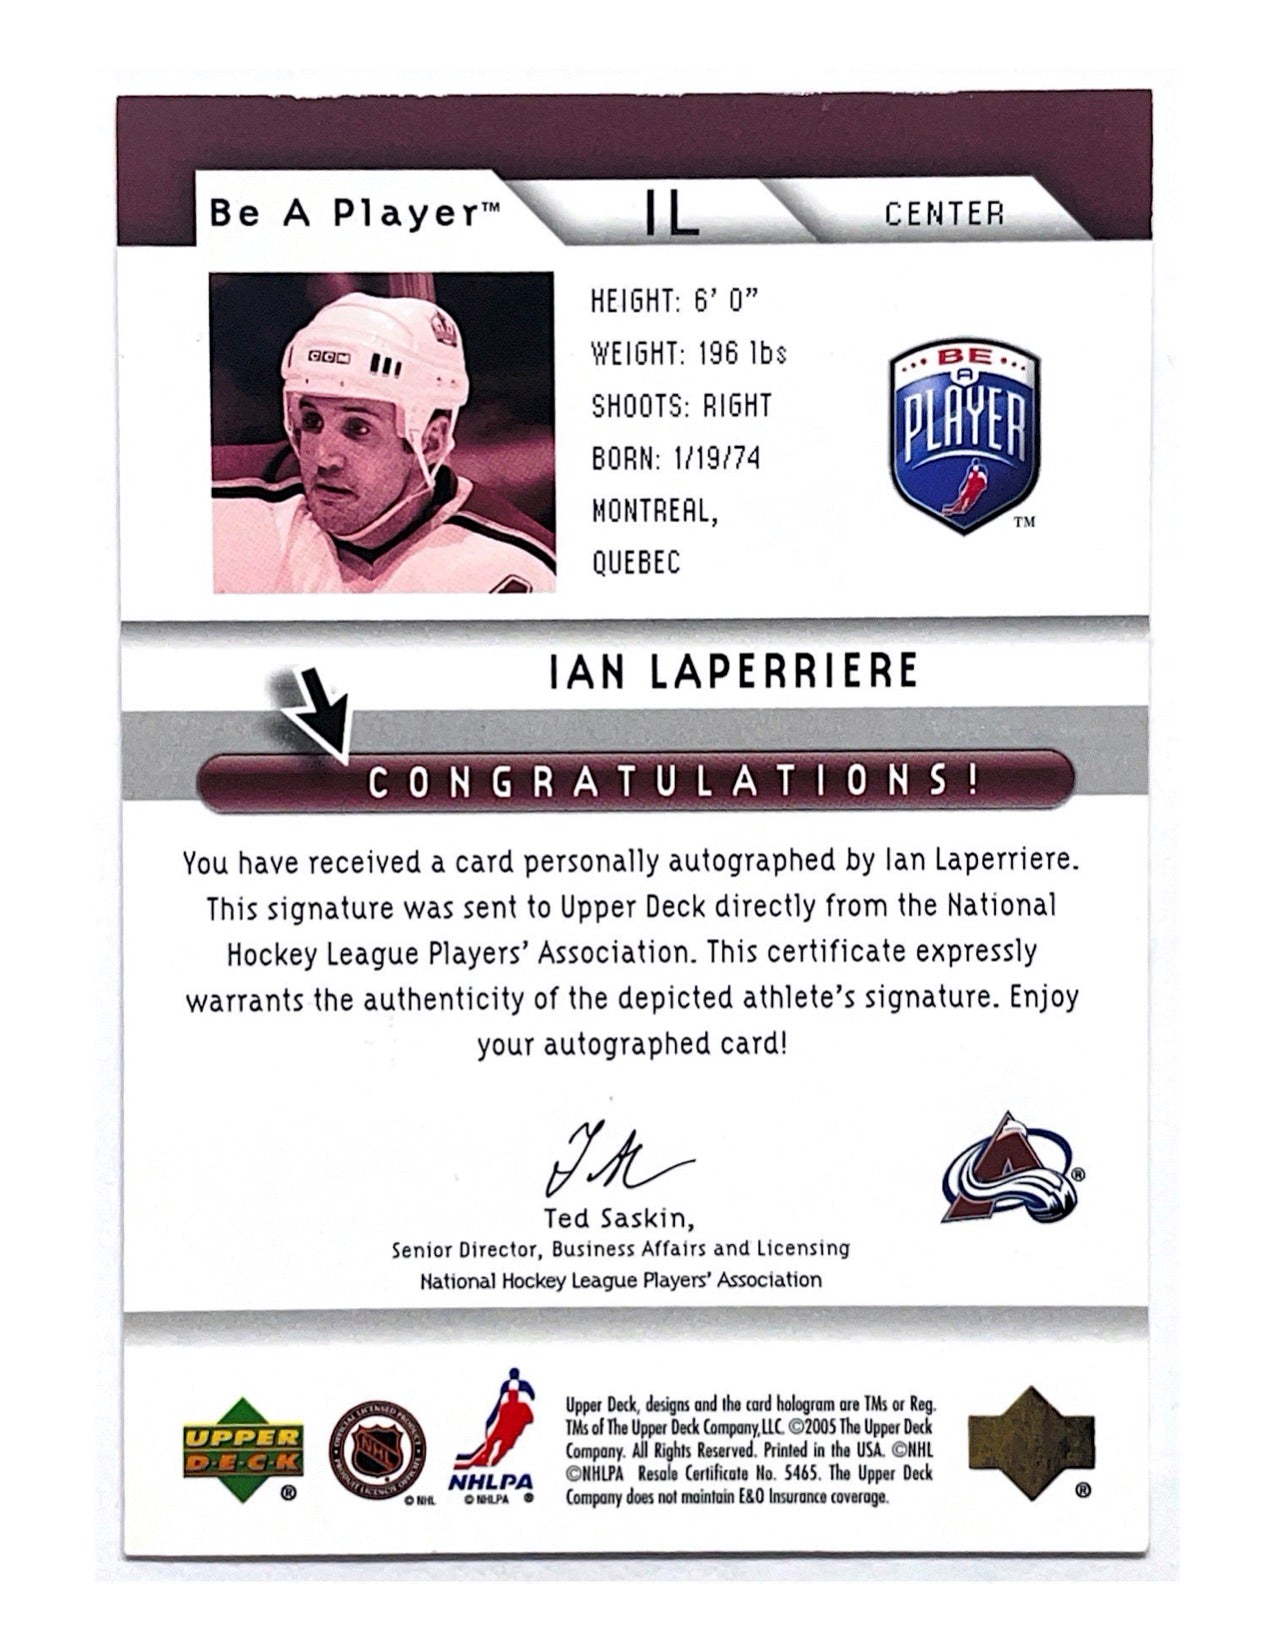 Ian Laperriere 2004-05 Upper Deck Be A Player Autograph #IL